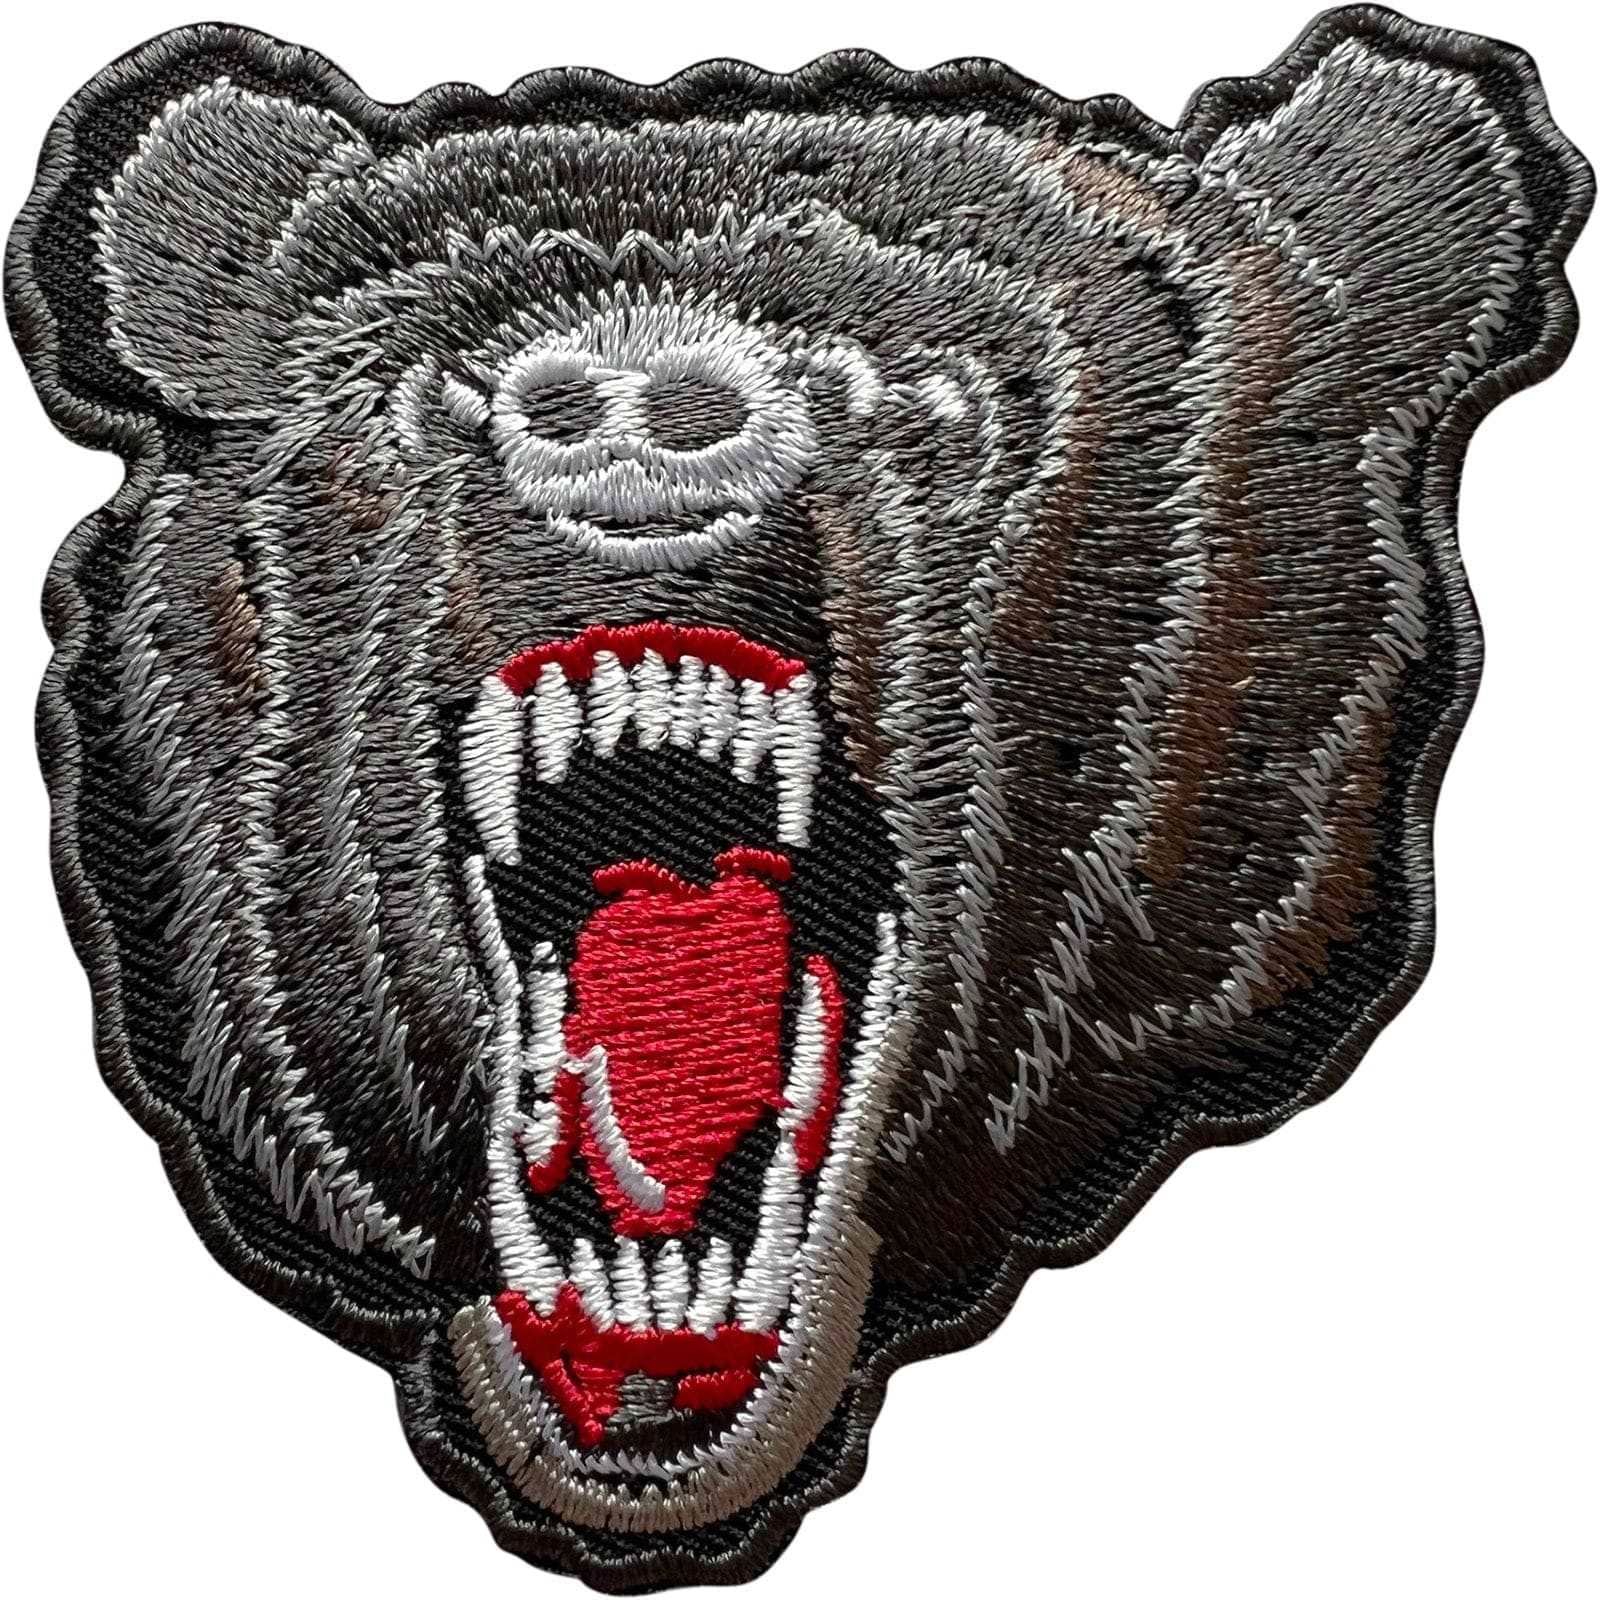 Bear Patch Iron Sew On Fabric Animal Embroidered Badge Embroidery Applique Motif